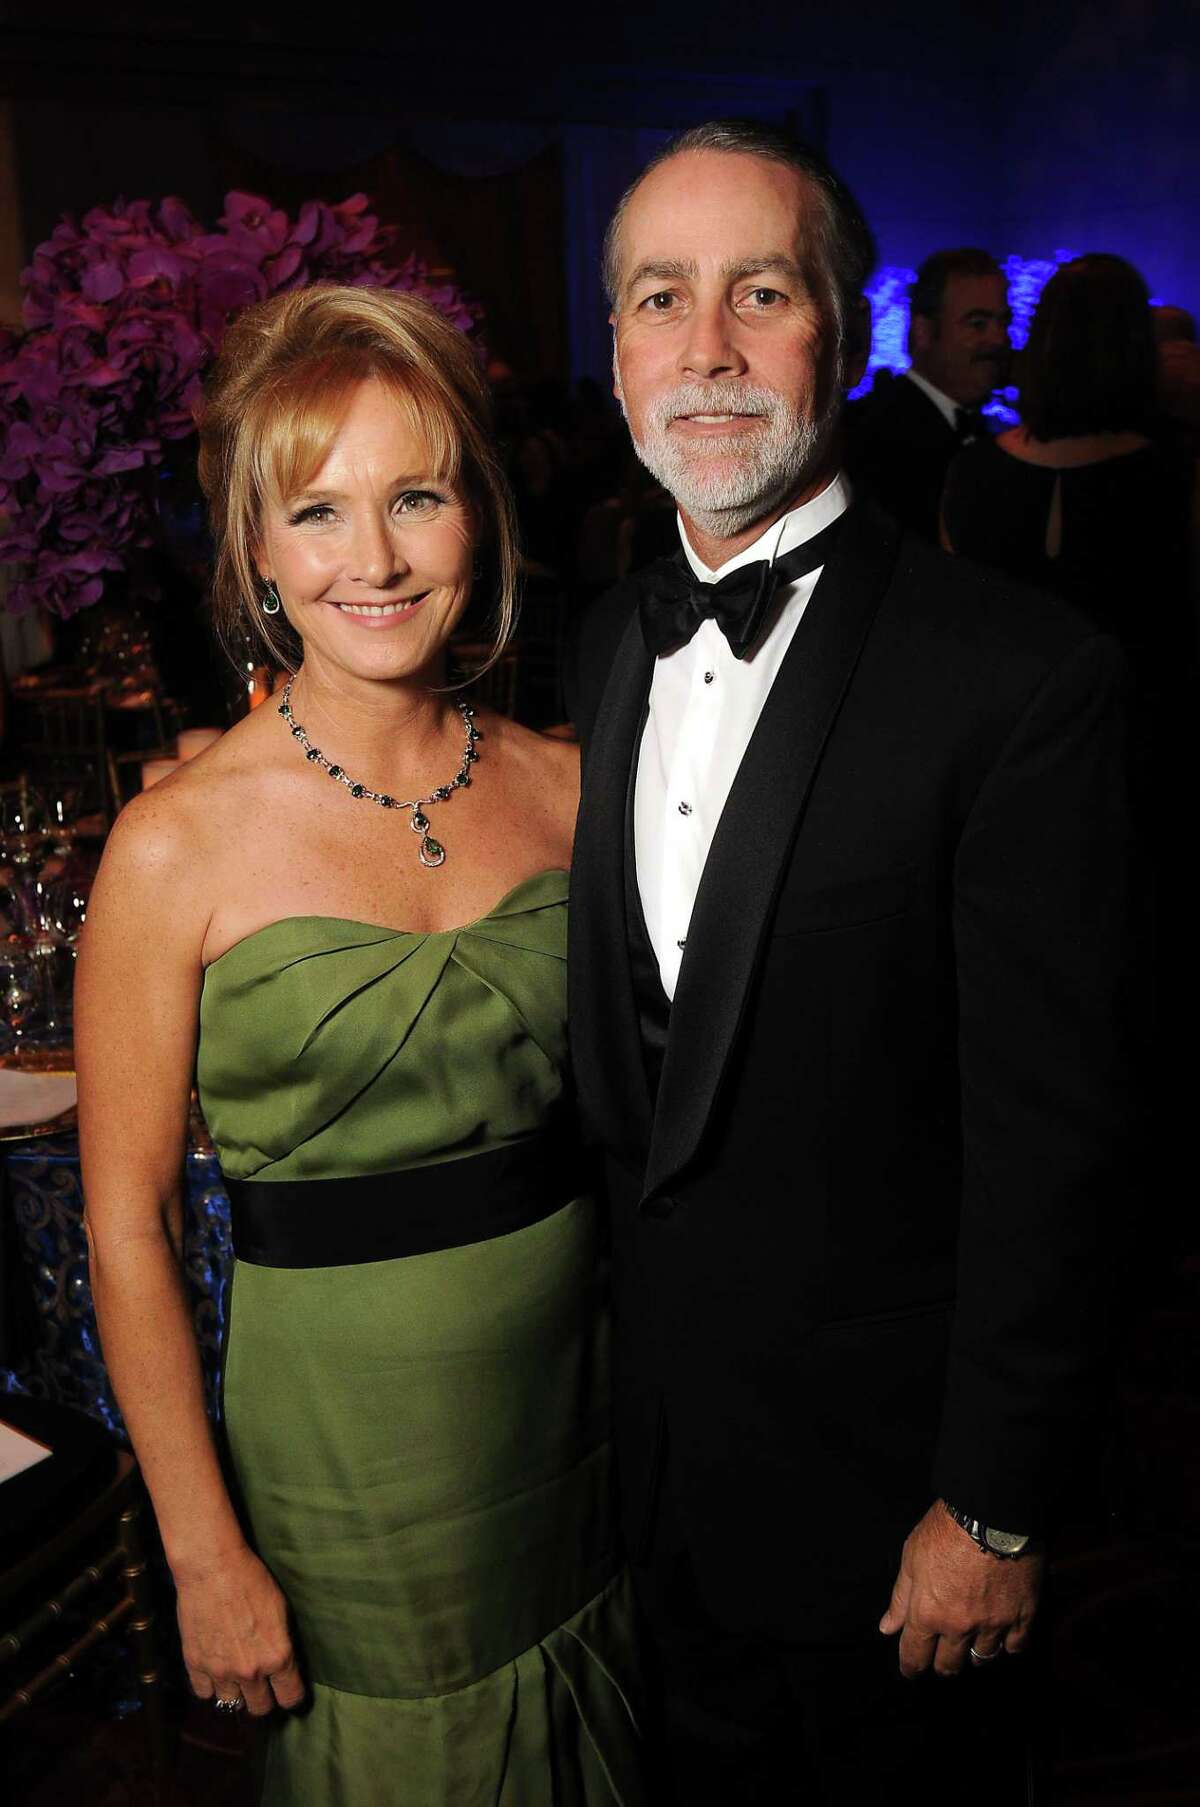 Randa and Charlie Williams at the Audrey Hepburn Society Ball at the Wortham Theater Tuesday Oct 14, 2014.(Dave Rossman photo)